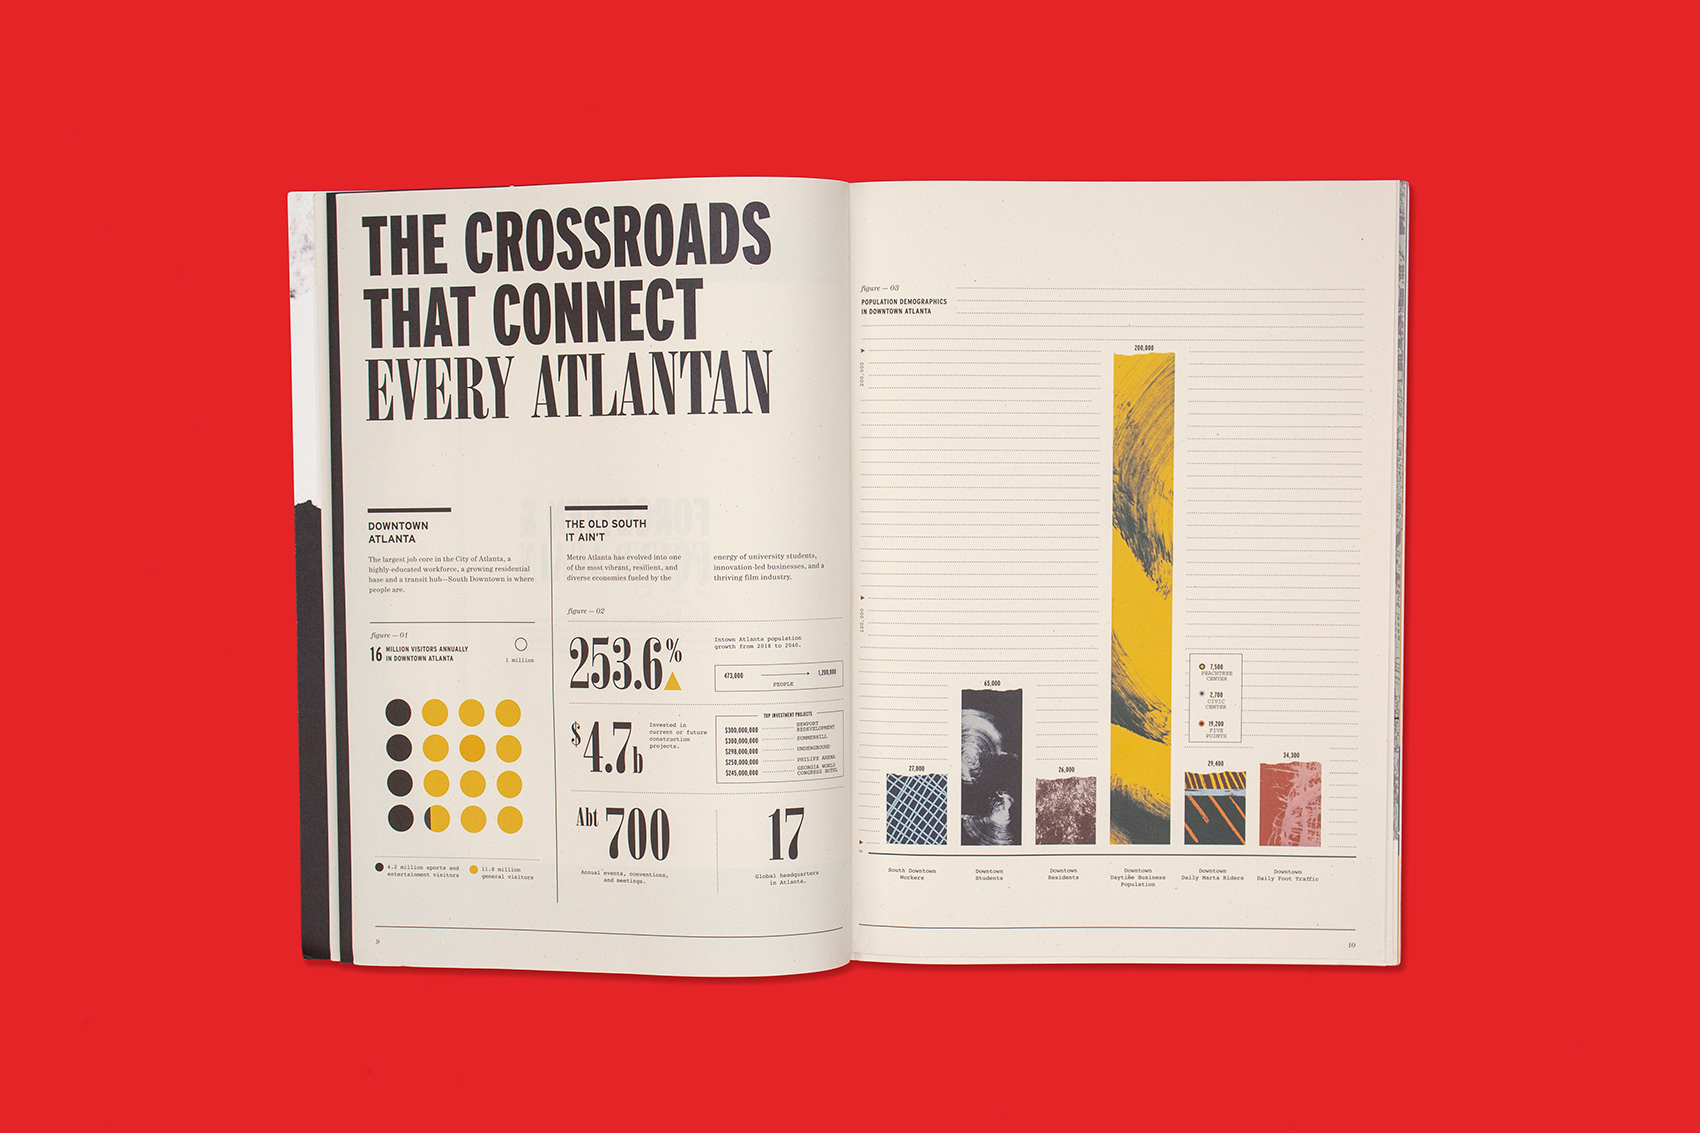 Inner view of South Downton Atlanta booklet with infographic and typography